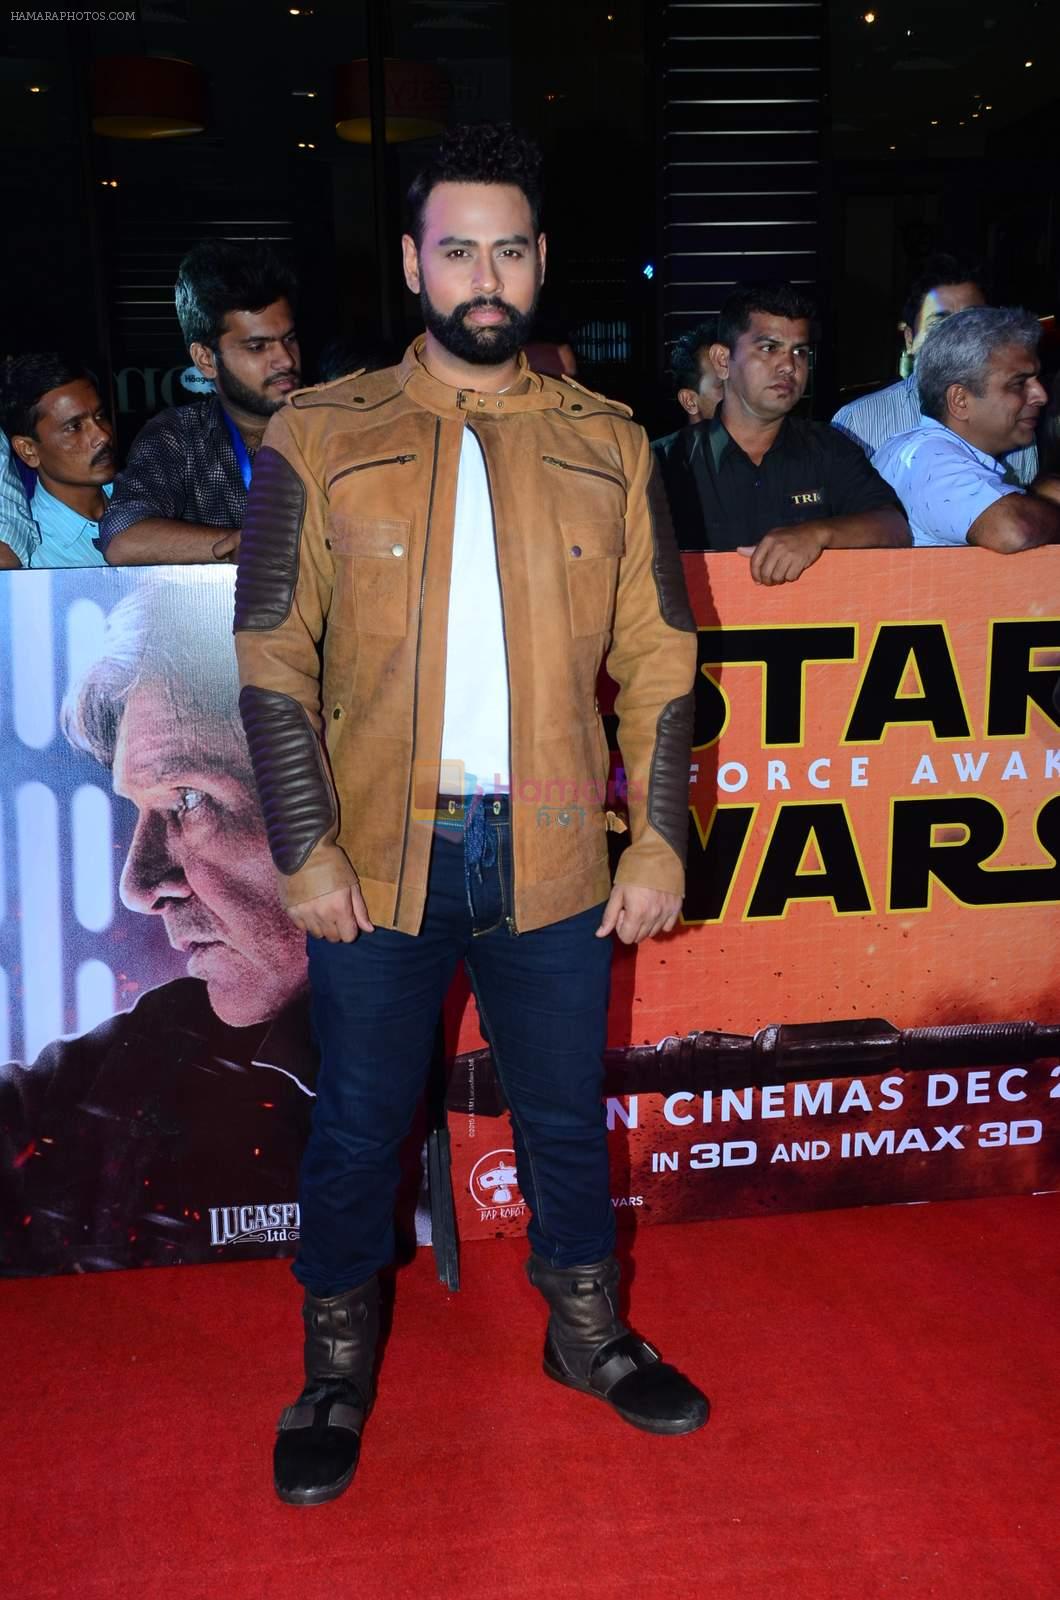 Andy at Star Wars premiere on 23rd Dec 2015